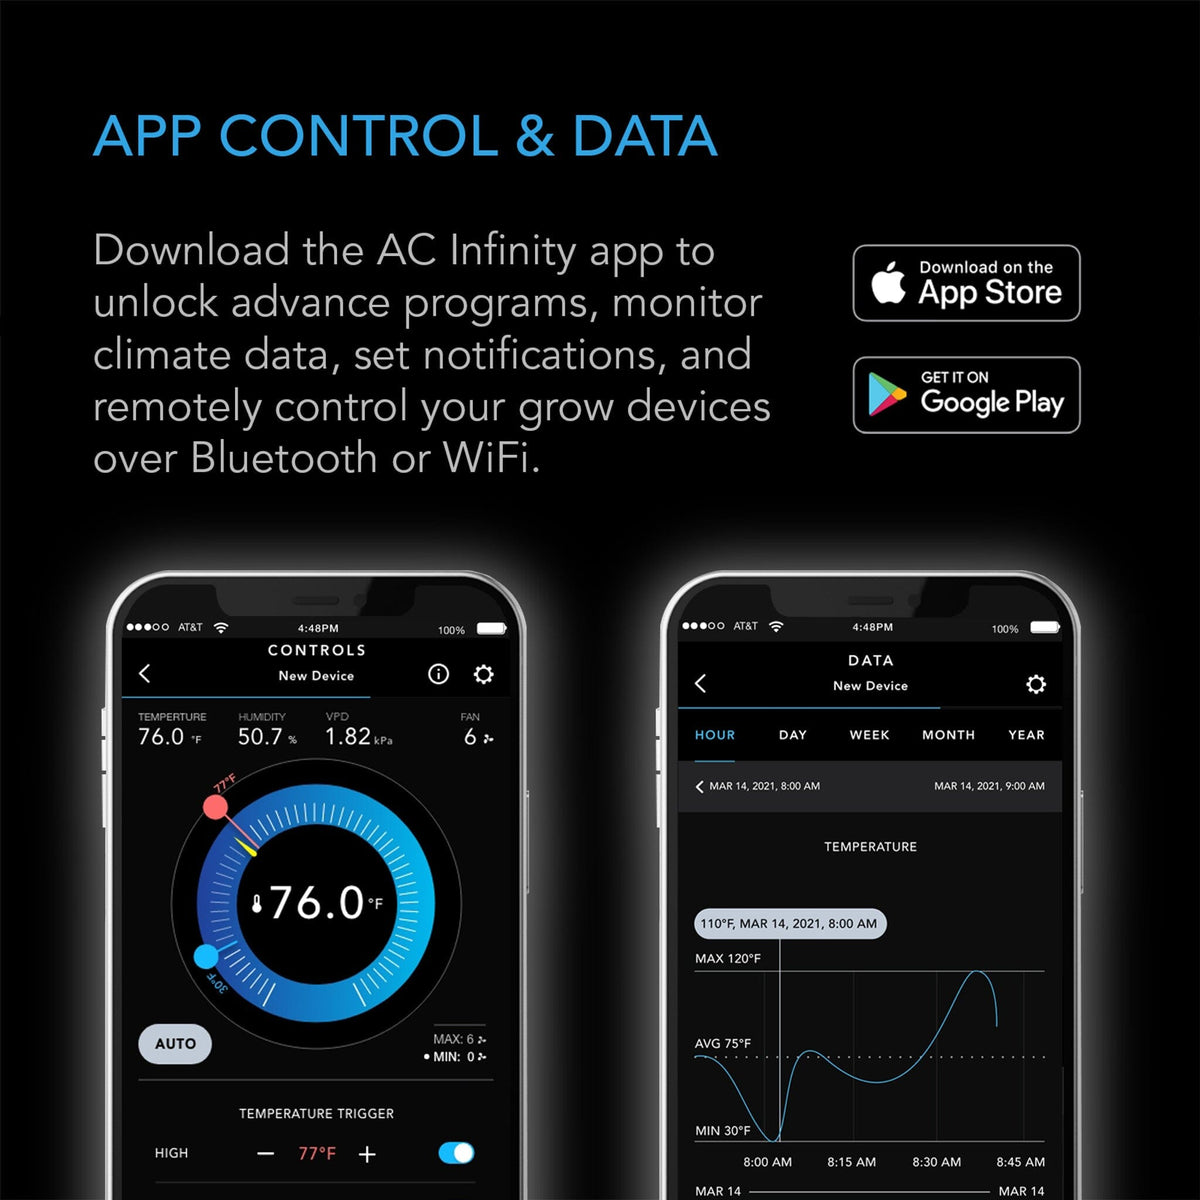 AC Infinity App control and data